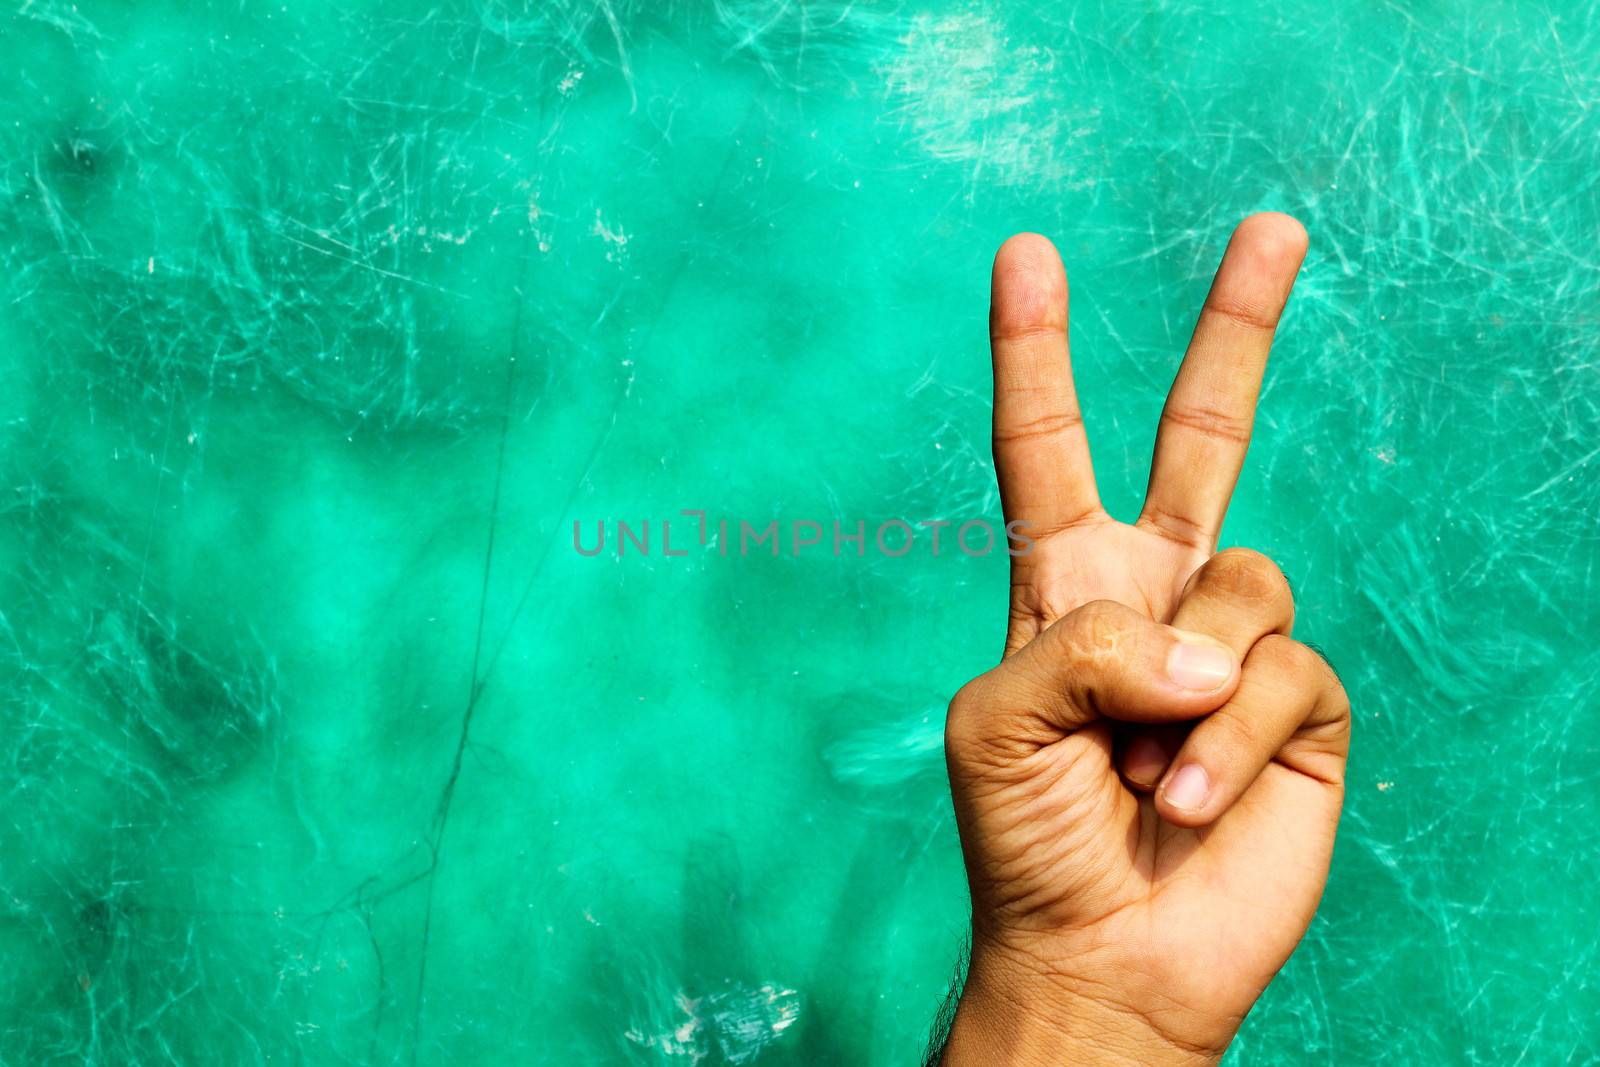 victory sign at grunge green background